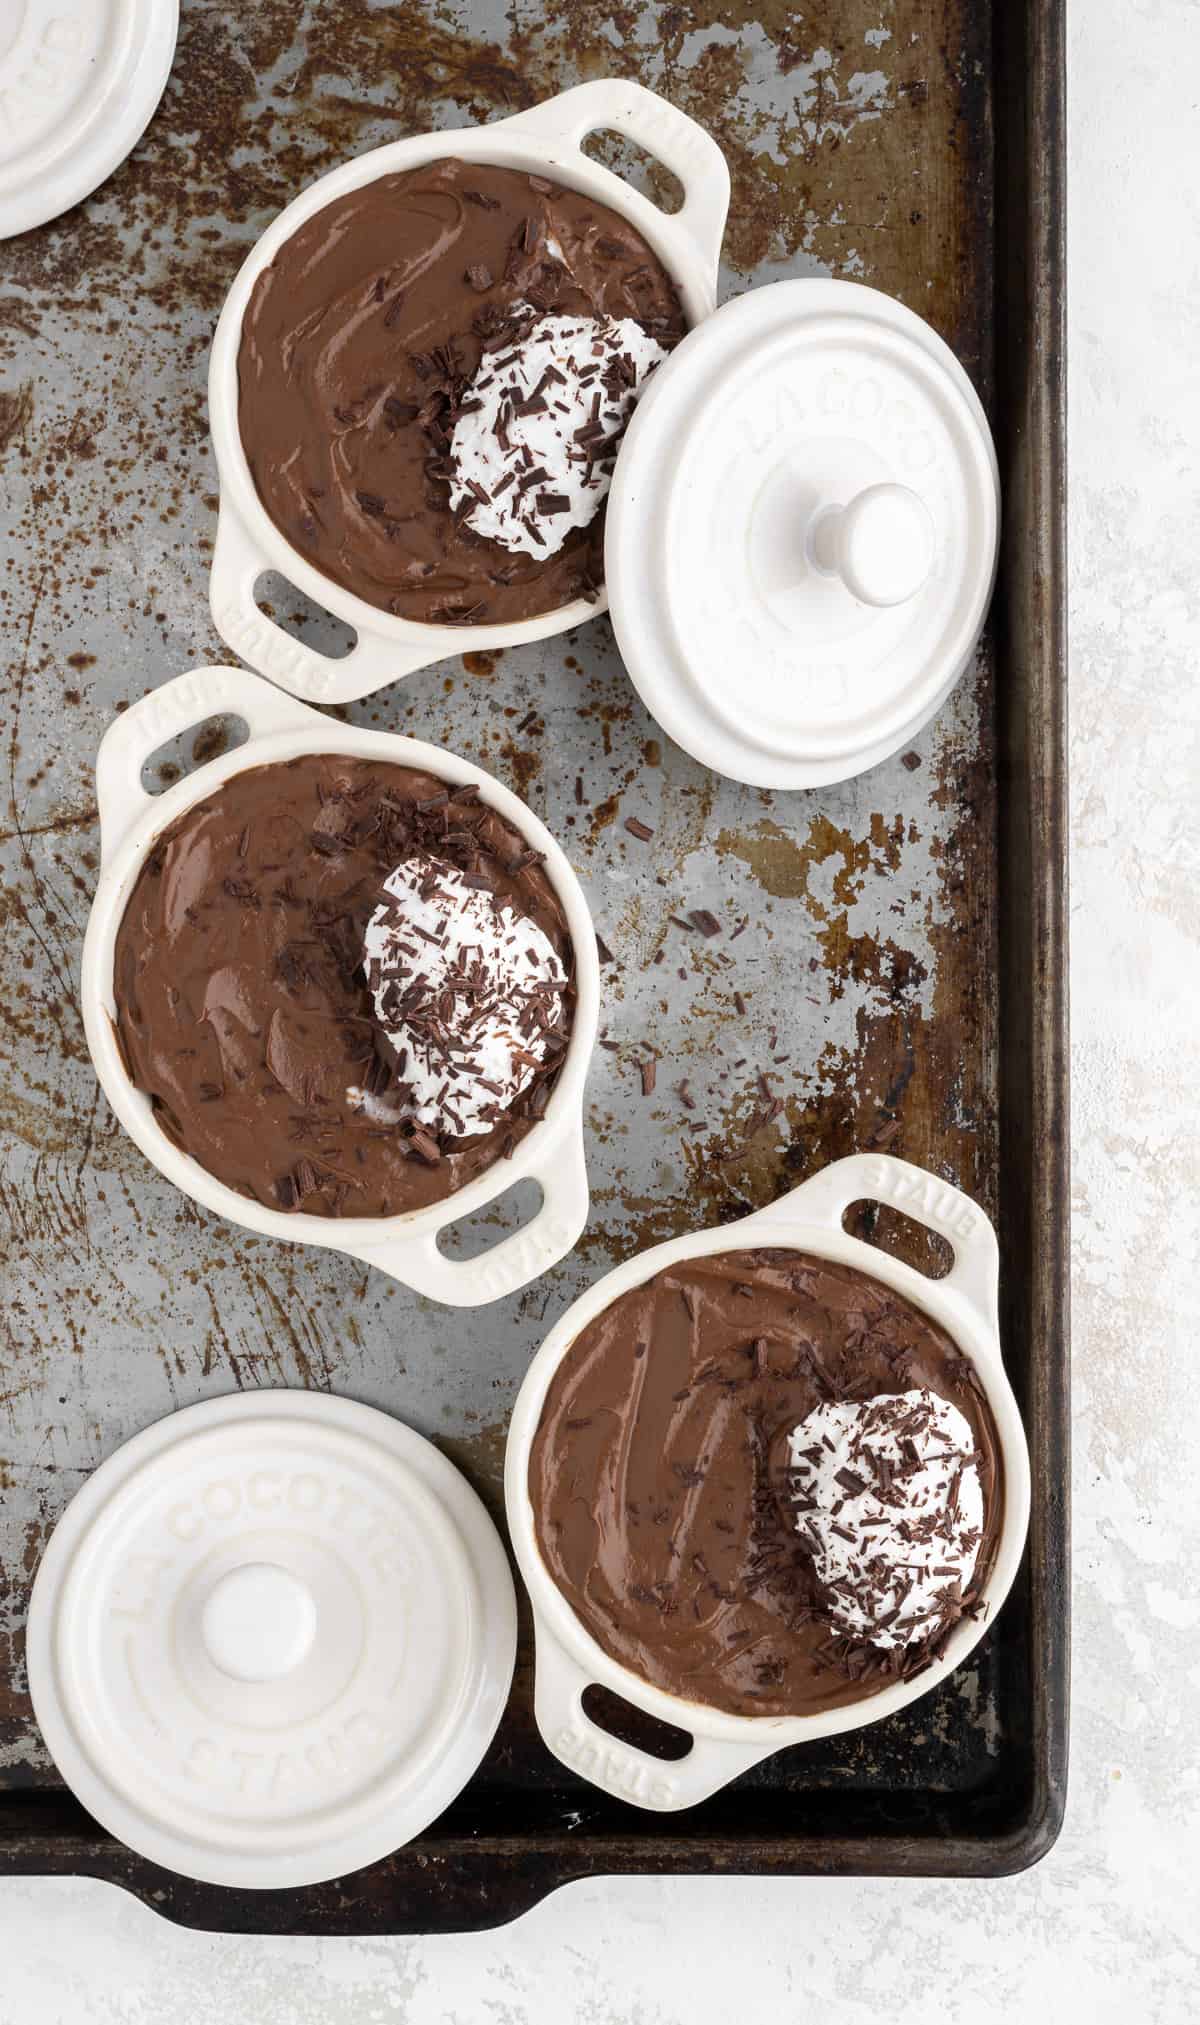 3 ramekins filled with chocolate avocado mousse on top of a baking sheet